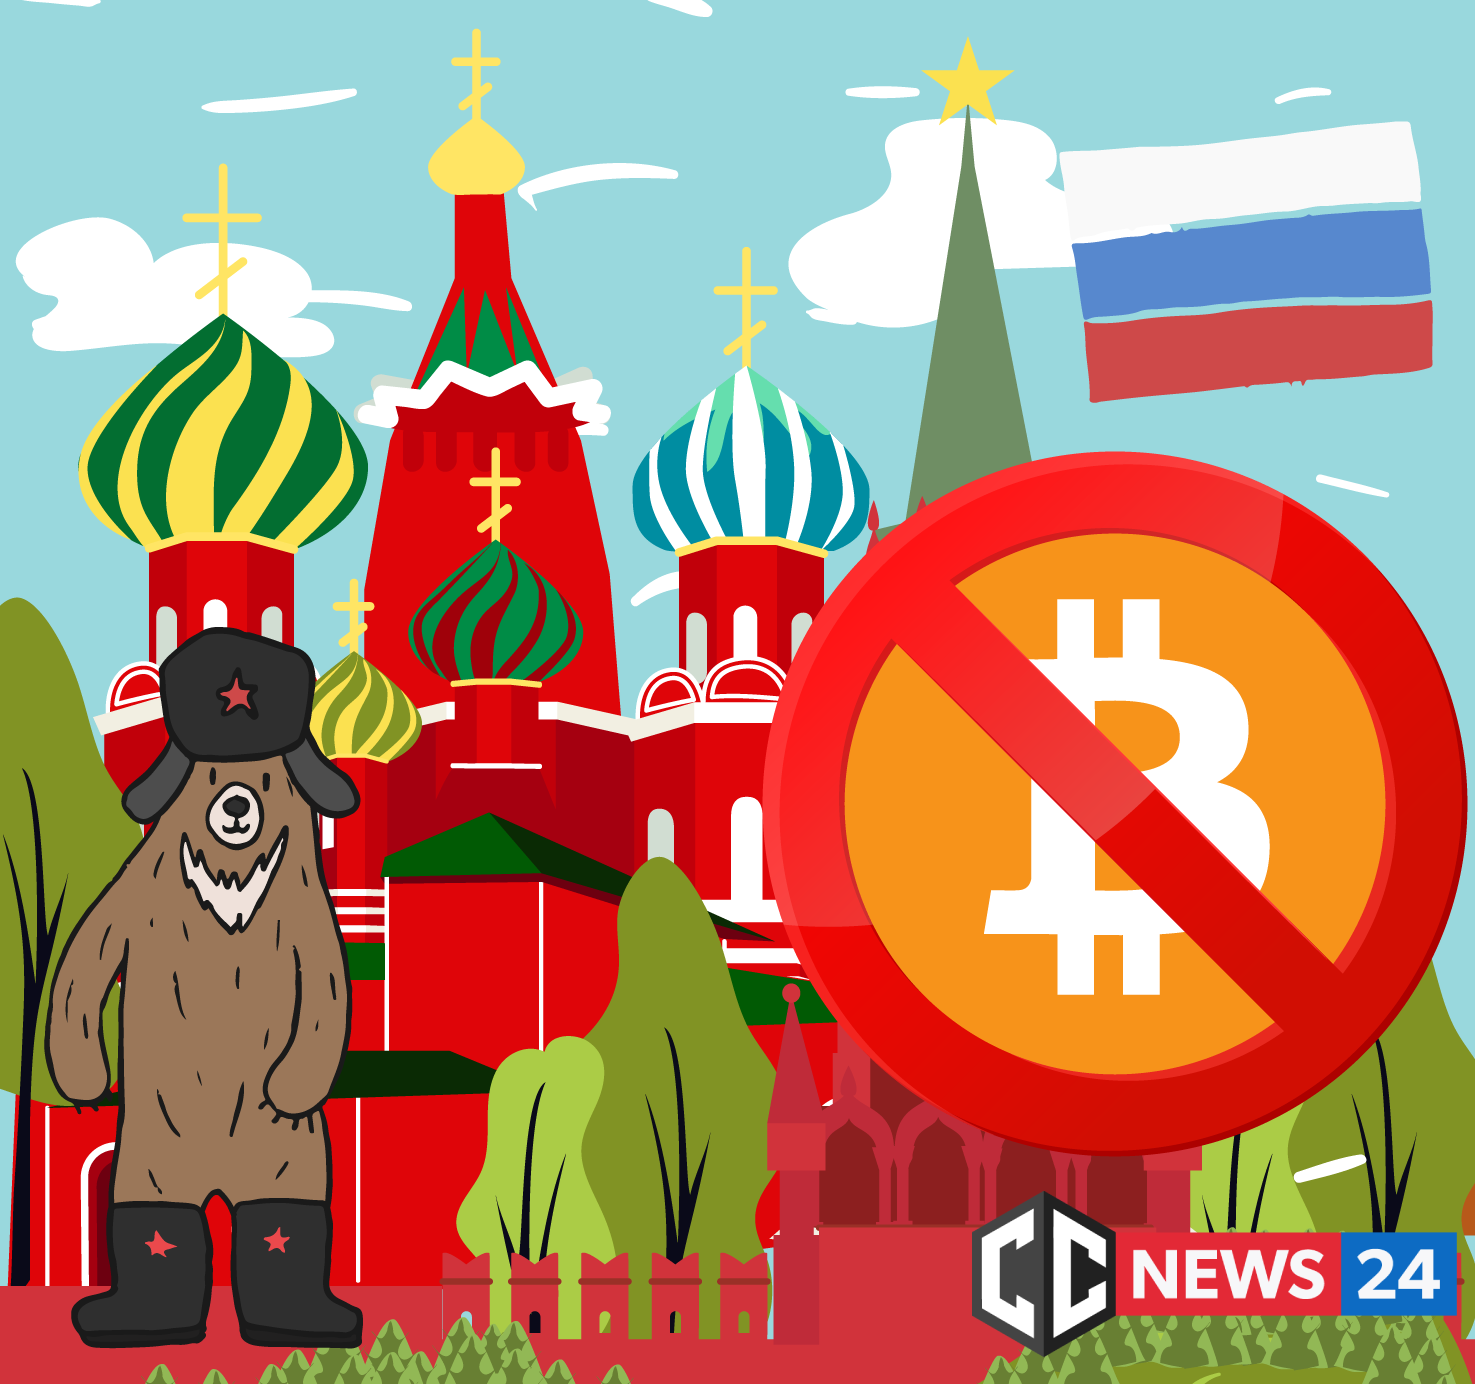 cryptocurrency russia ban